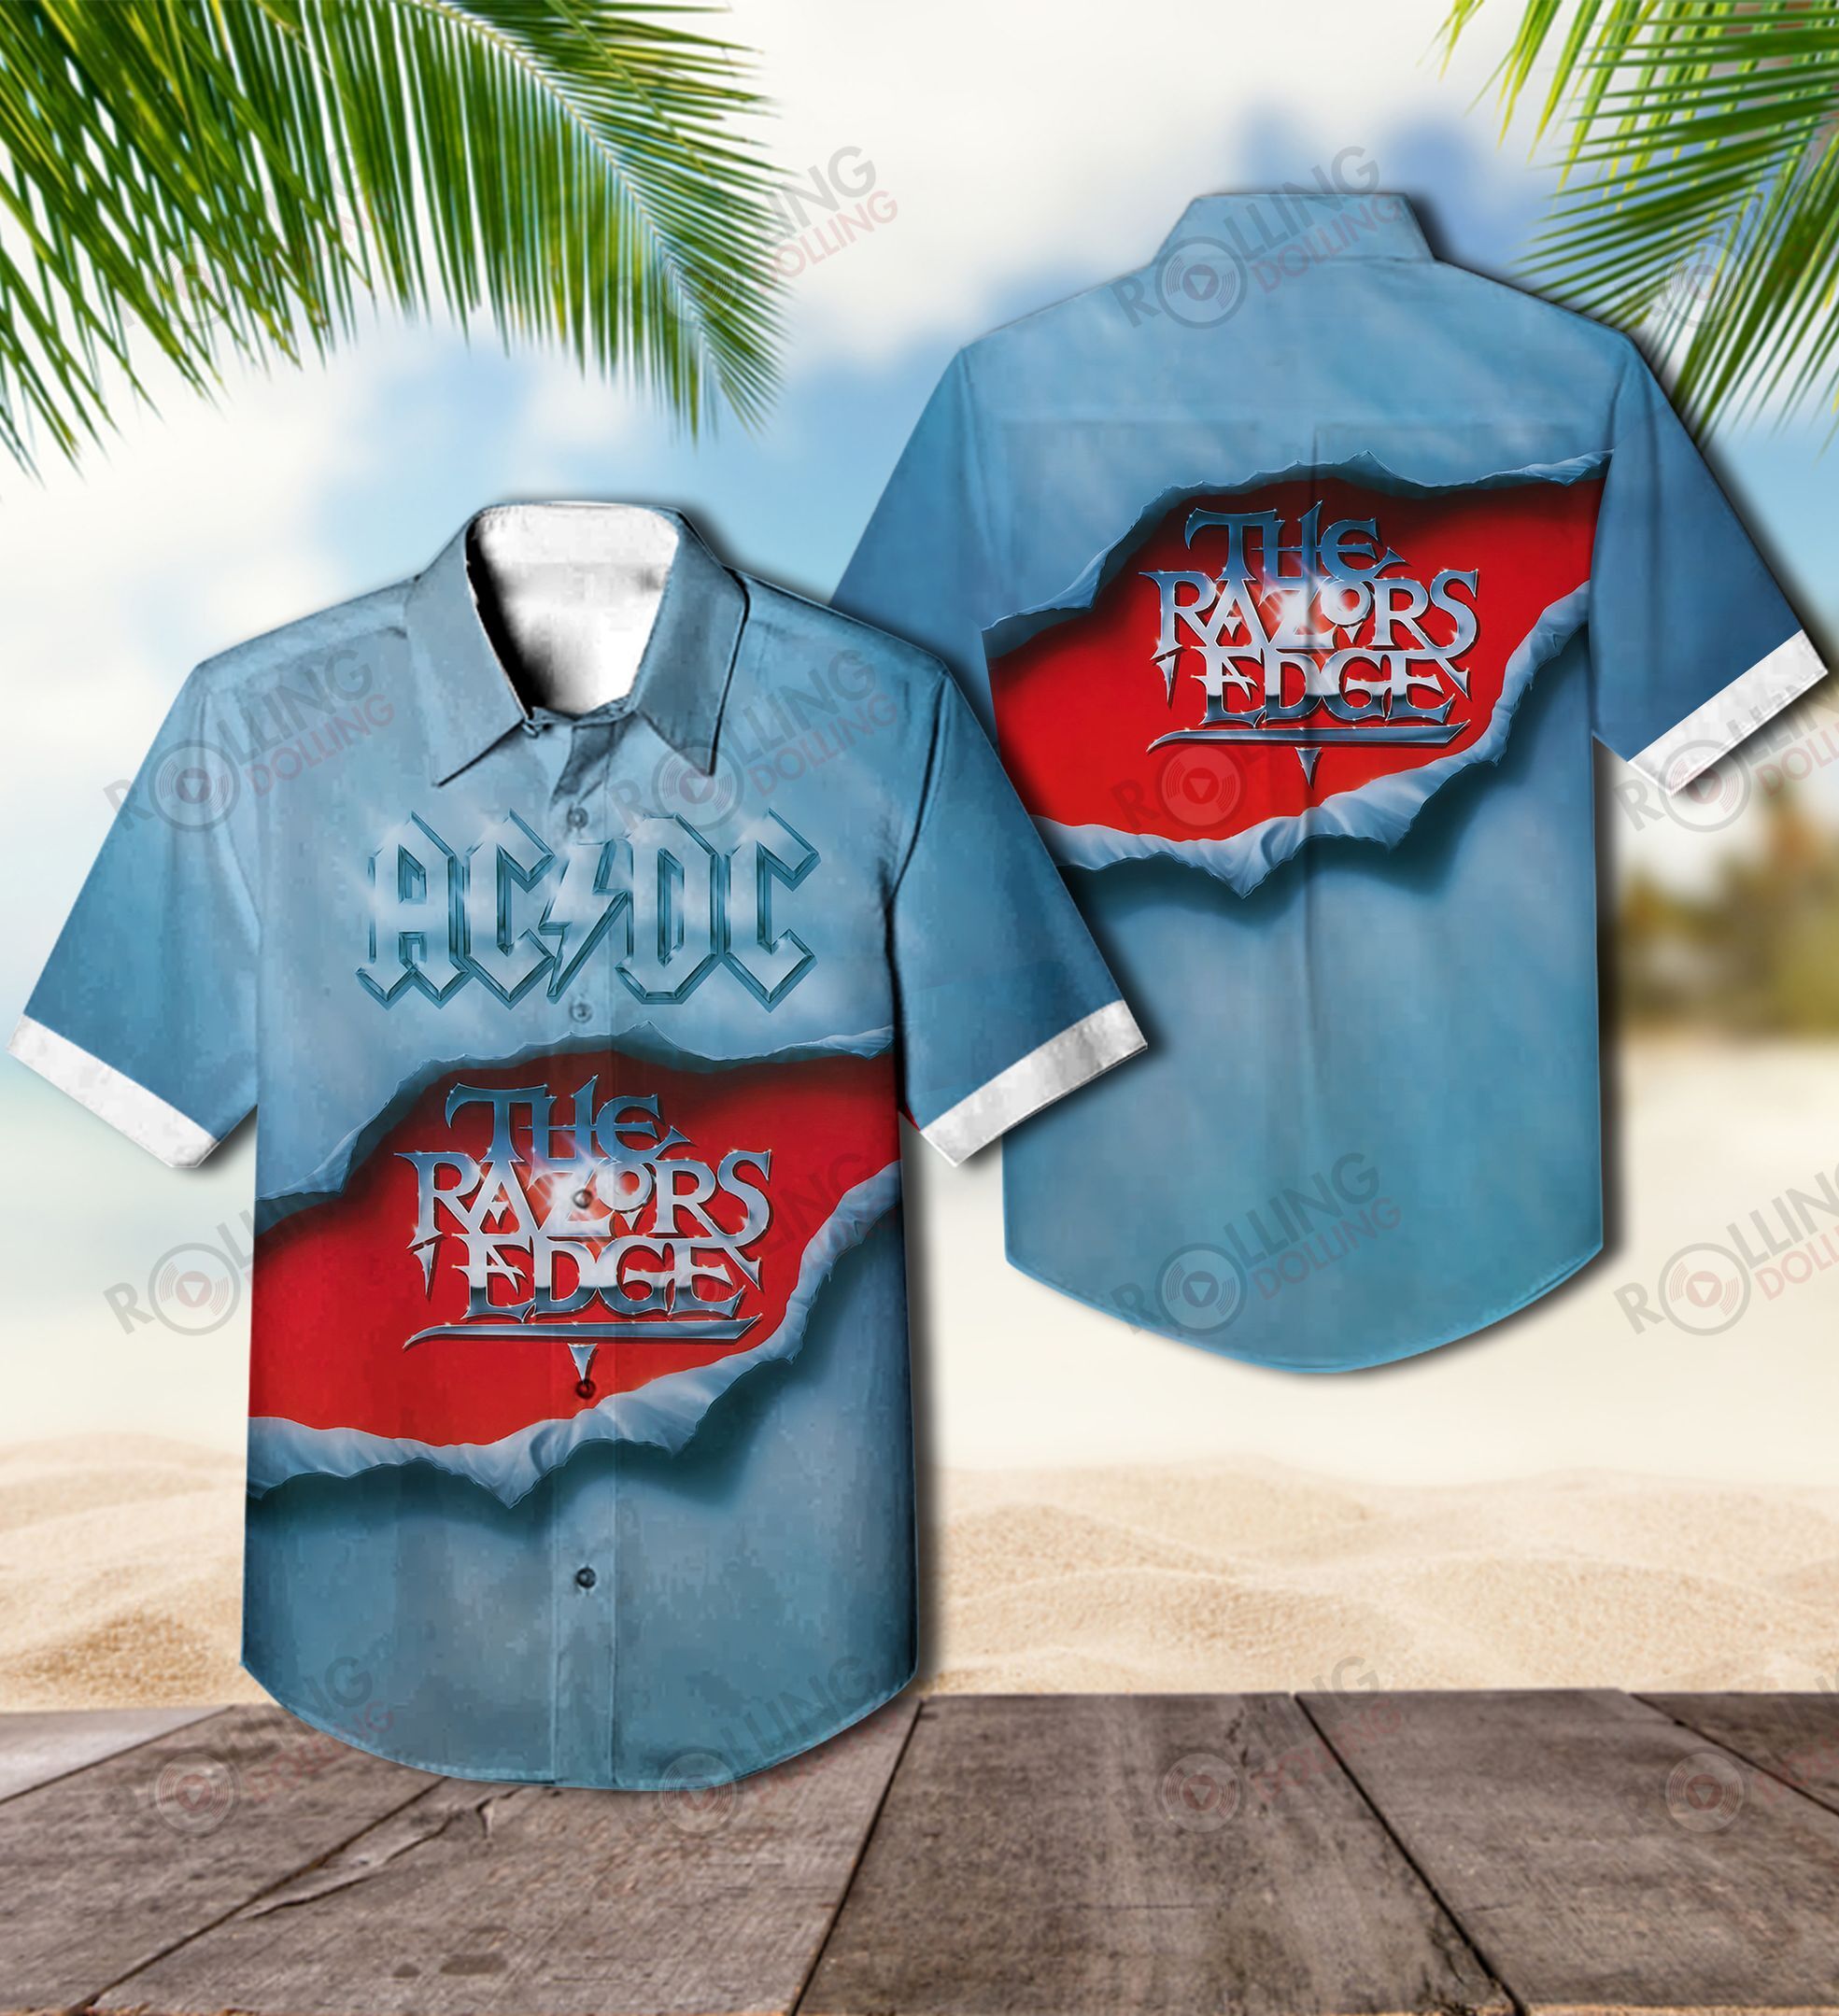 Now you can show off your love of all things band with this Hawaiian Shirt 59